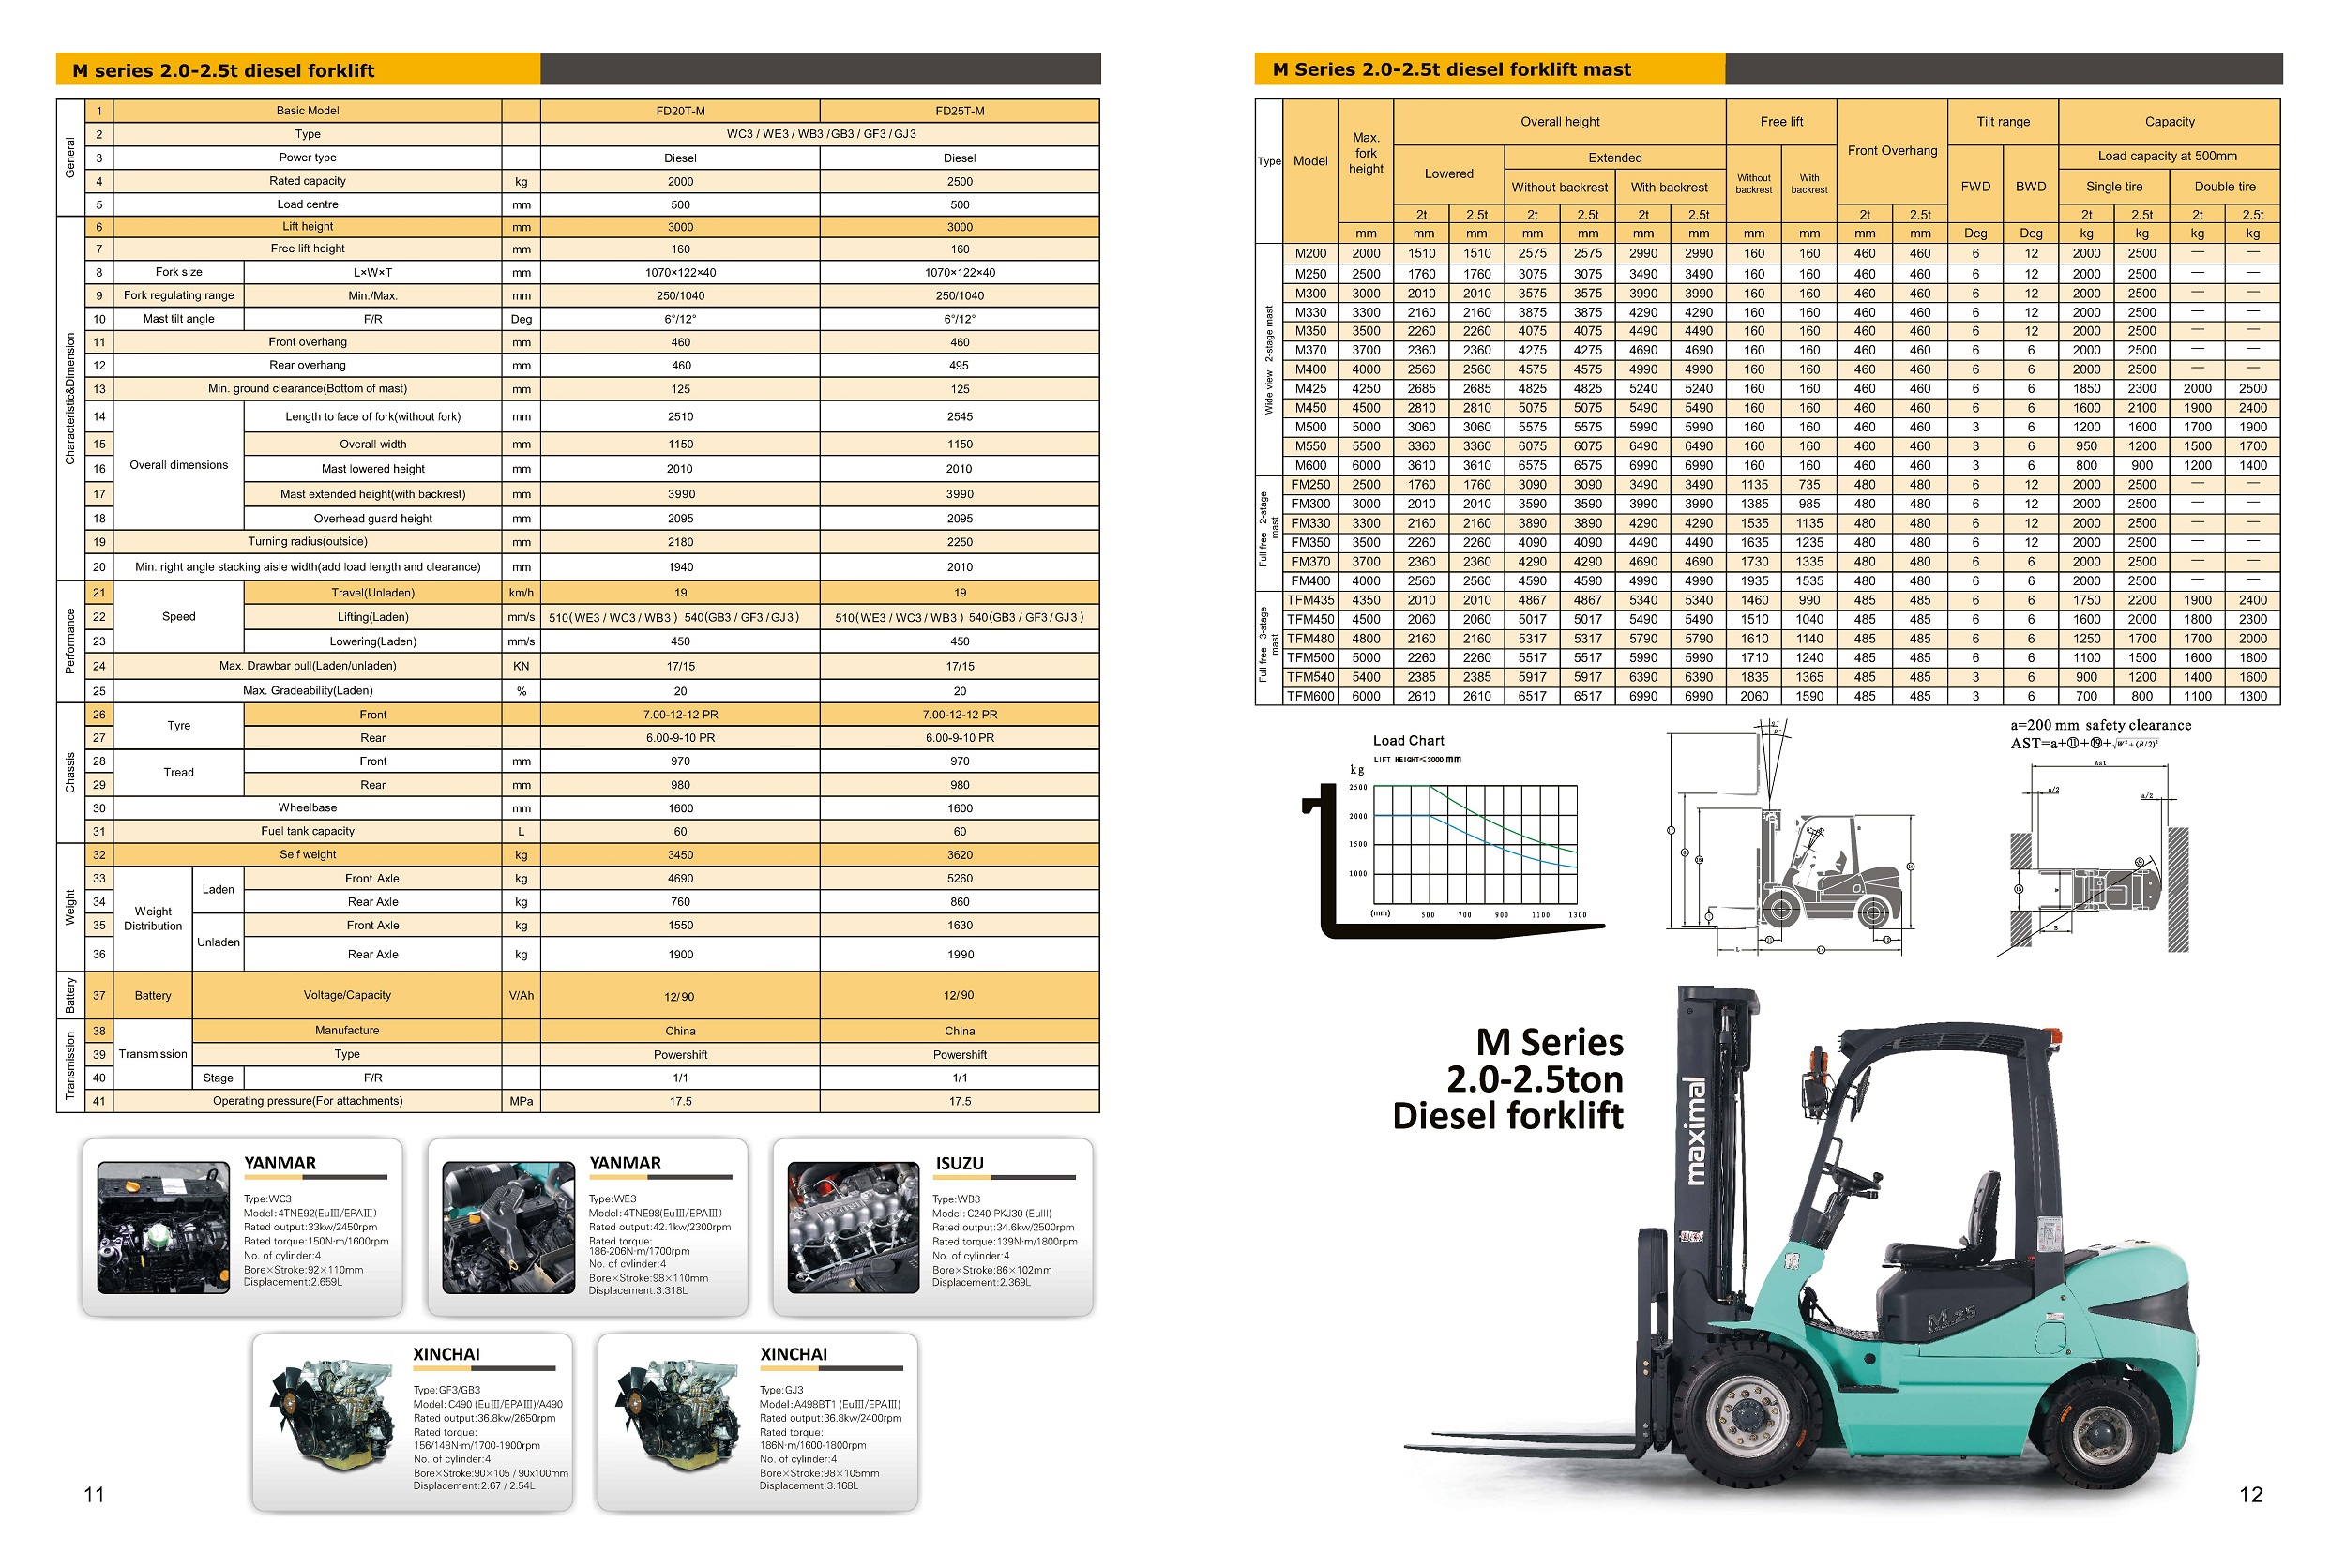 2.5 Tonne Maximal Diesel Forklift Specifications